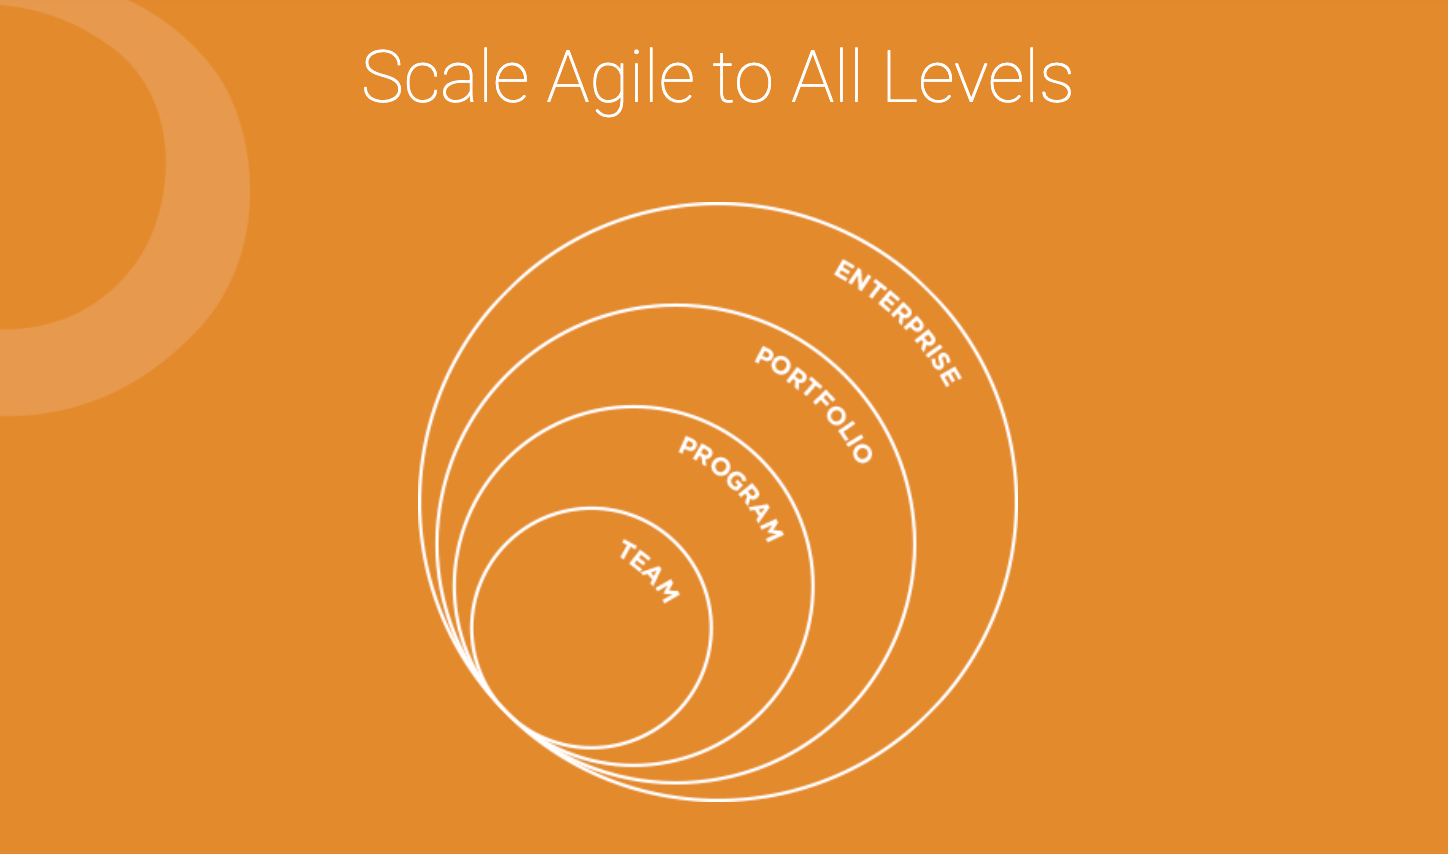 CollabNet VersionOne agile project management tool scale agile to all levels image.